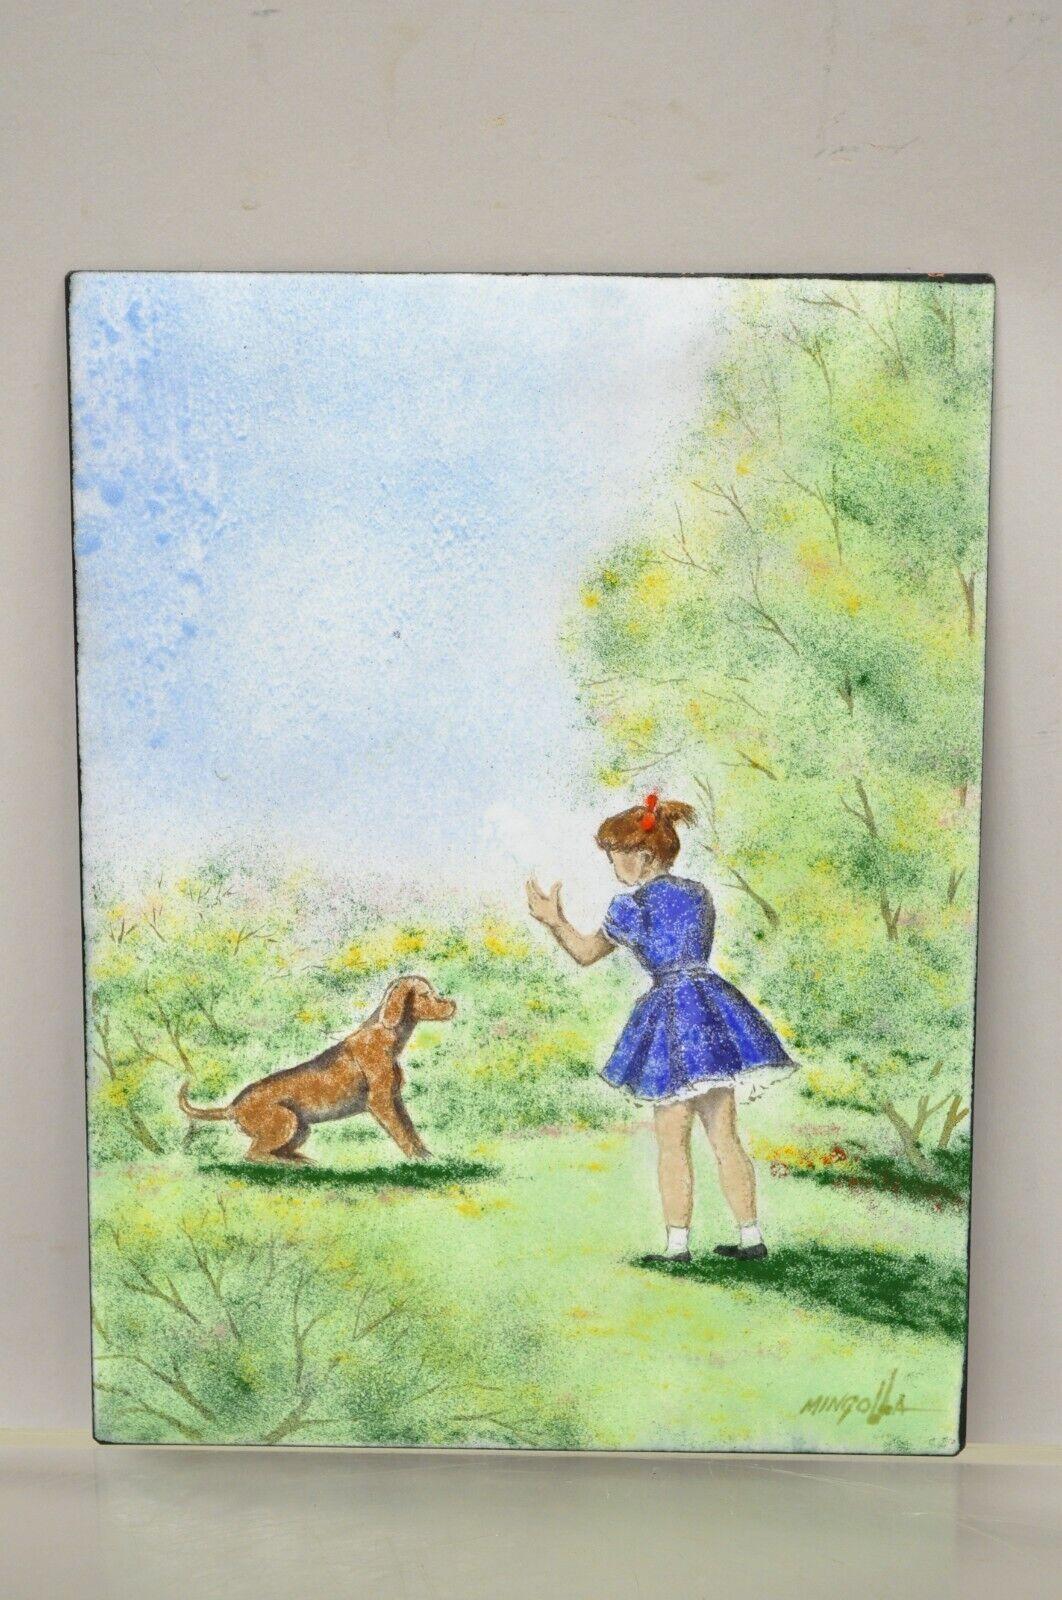 20th Century Dom Dominic Mingolla Enamel on Copper Painting Girl with Dog in Field 12 x 9 For Sale